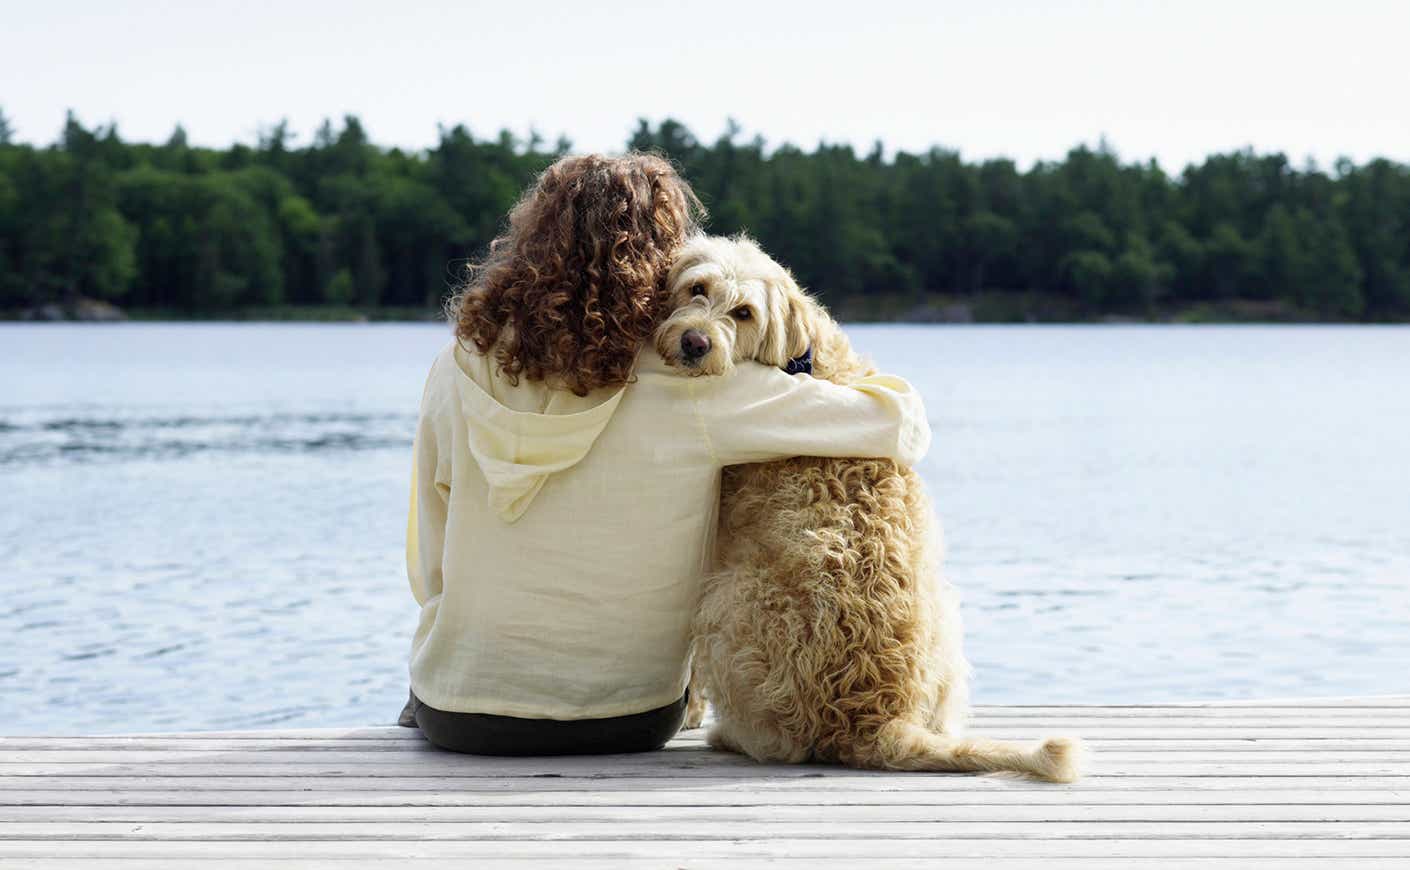 Woman sitting with dog on jetty, rear view